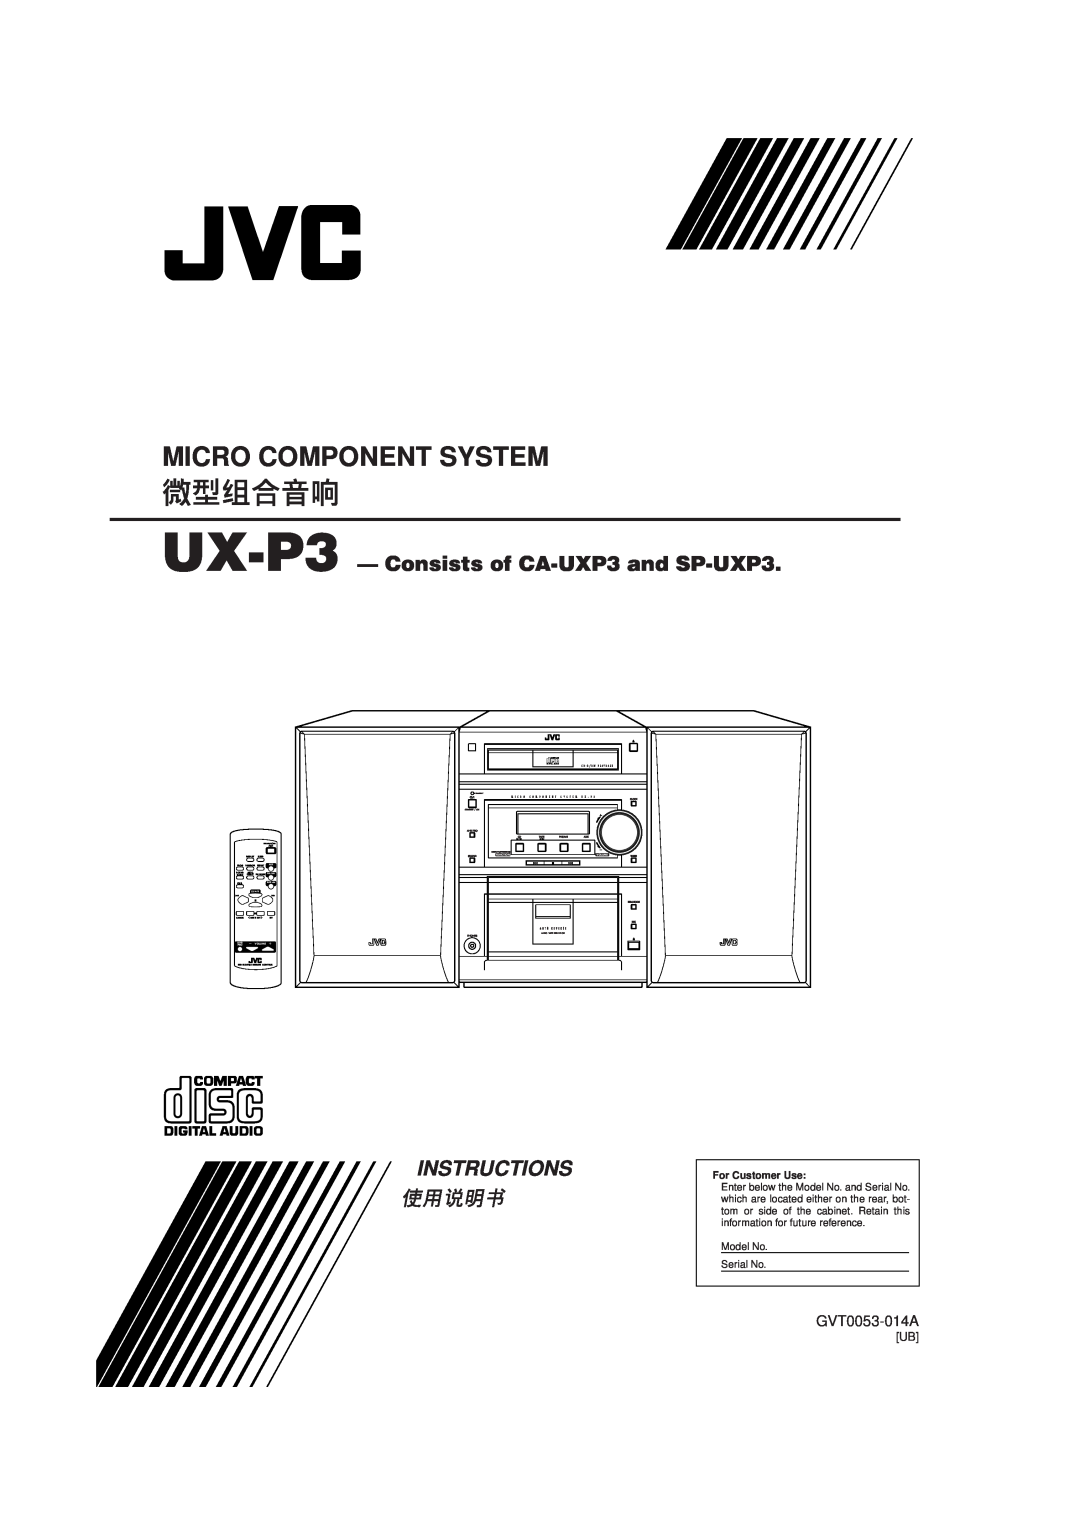 JVC manual UX-P3 - Consists of CA-UXP3and SP-UXP3, GVT0053-014A, Micro Component System, Instructions, For Customer Use 